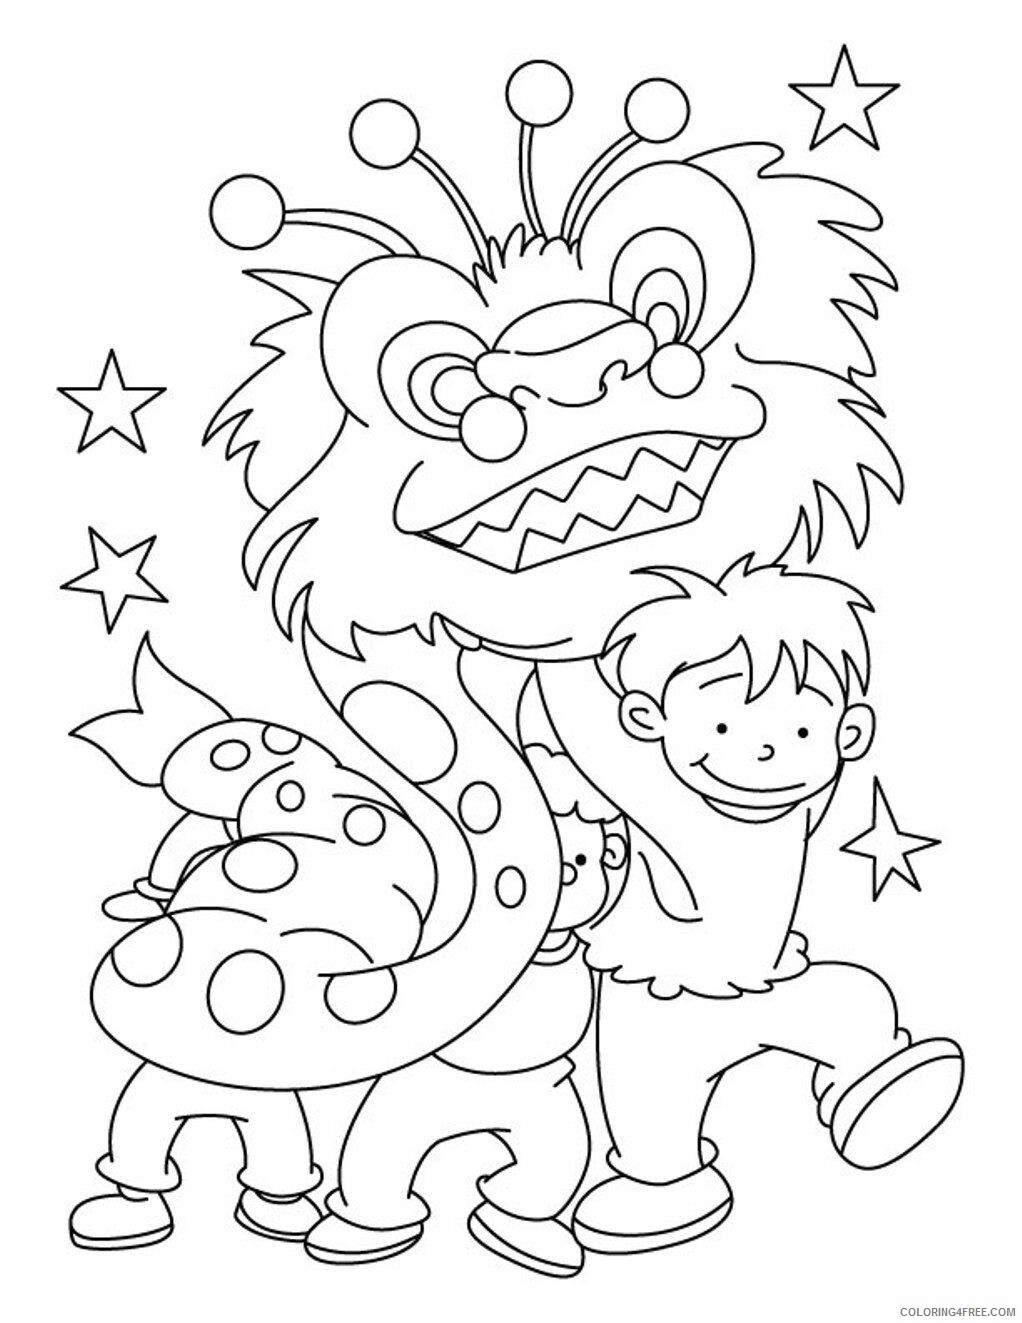 Chinese New Year Coloring Pages Holiday Chinese New Year Free Printable 2021 0074 Coloring4free